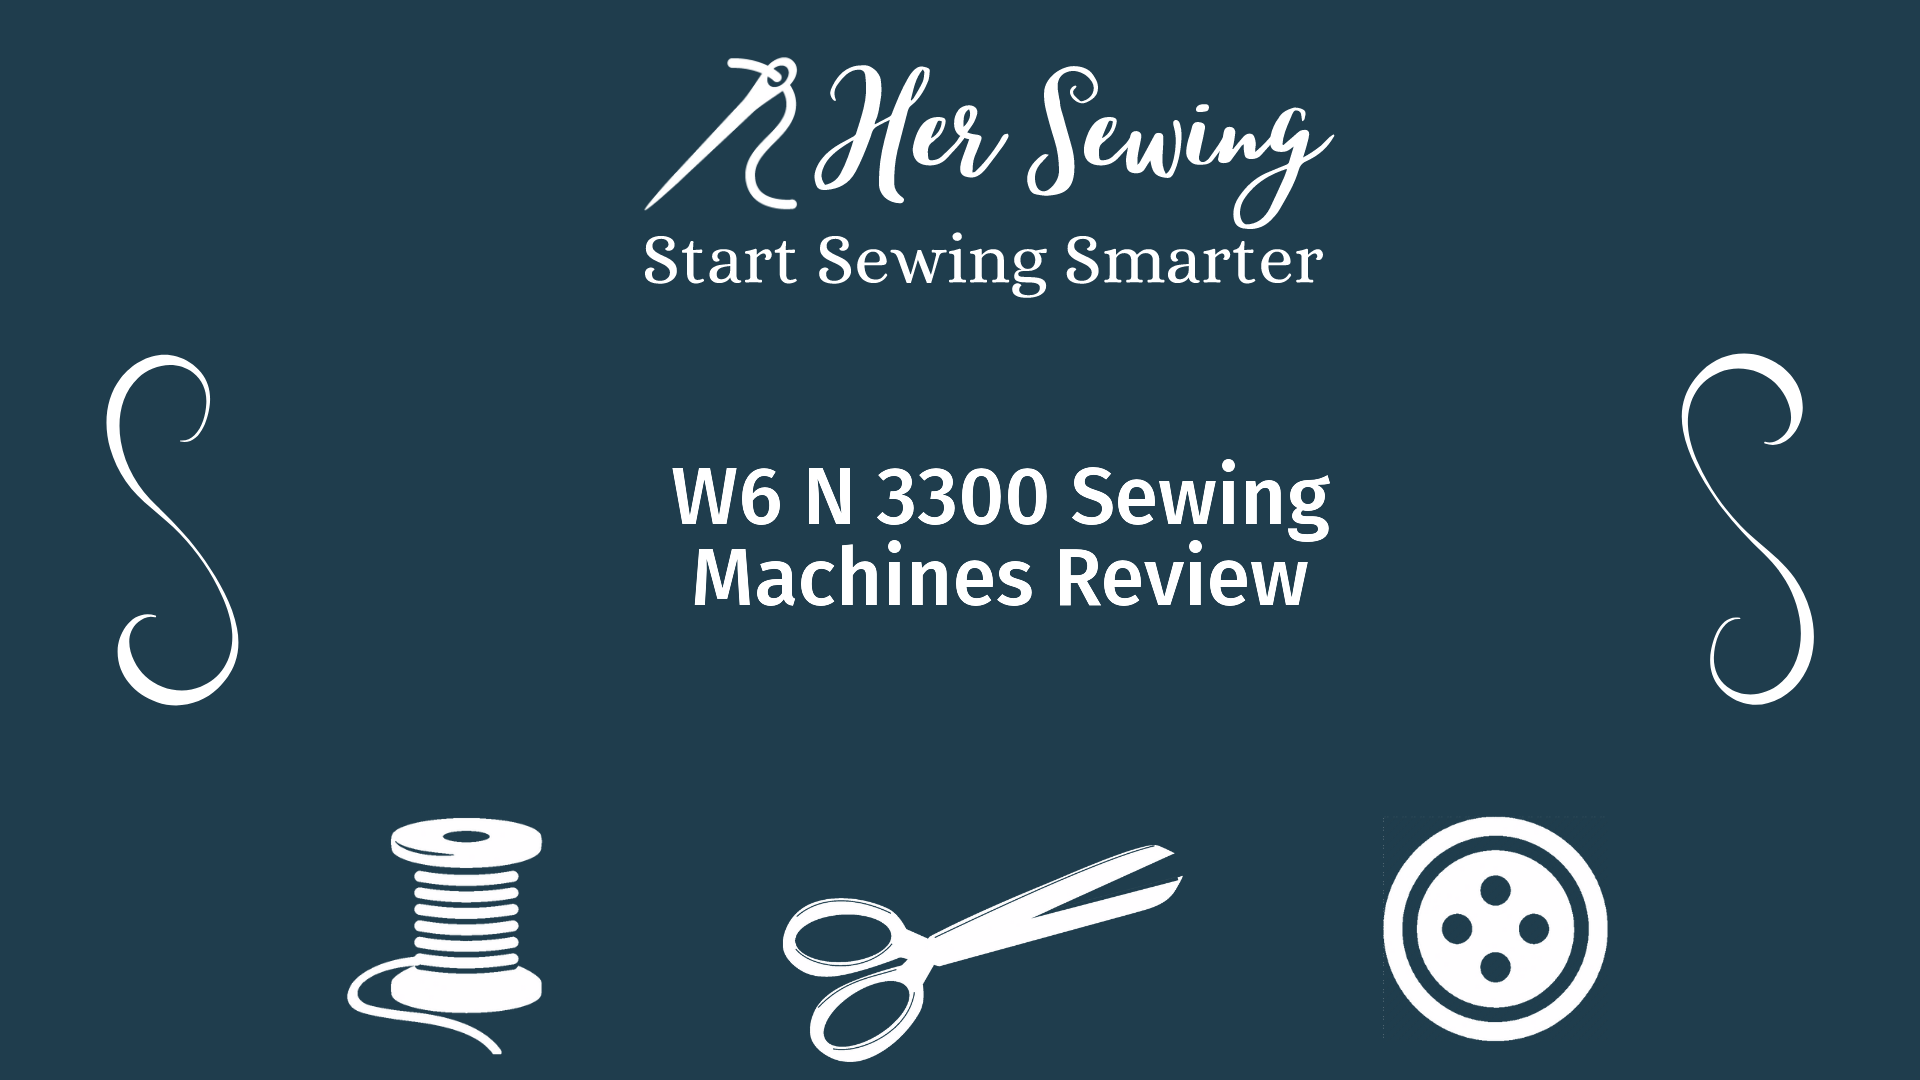 W6 N 3300 Sewing Machines Review